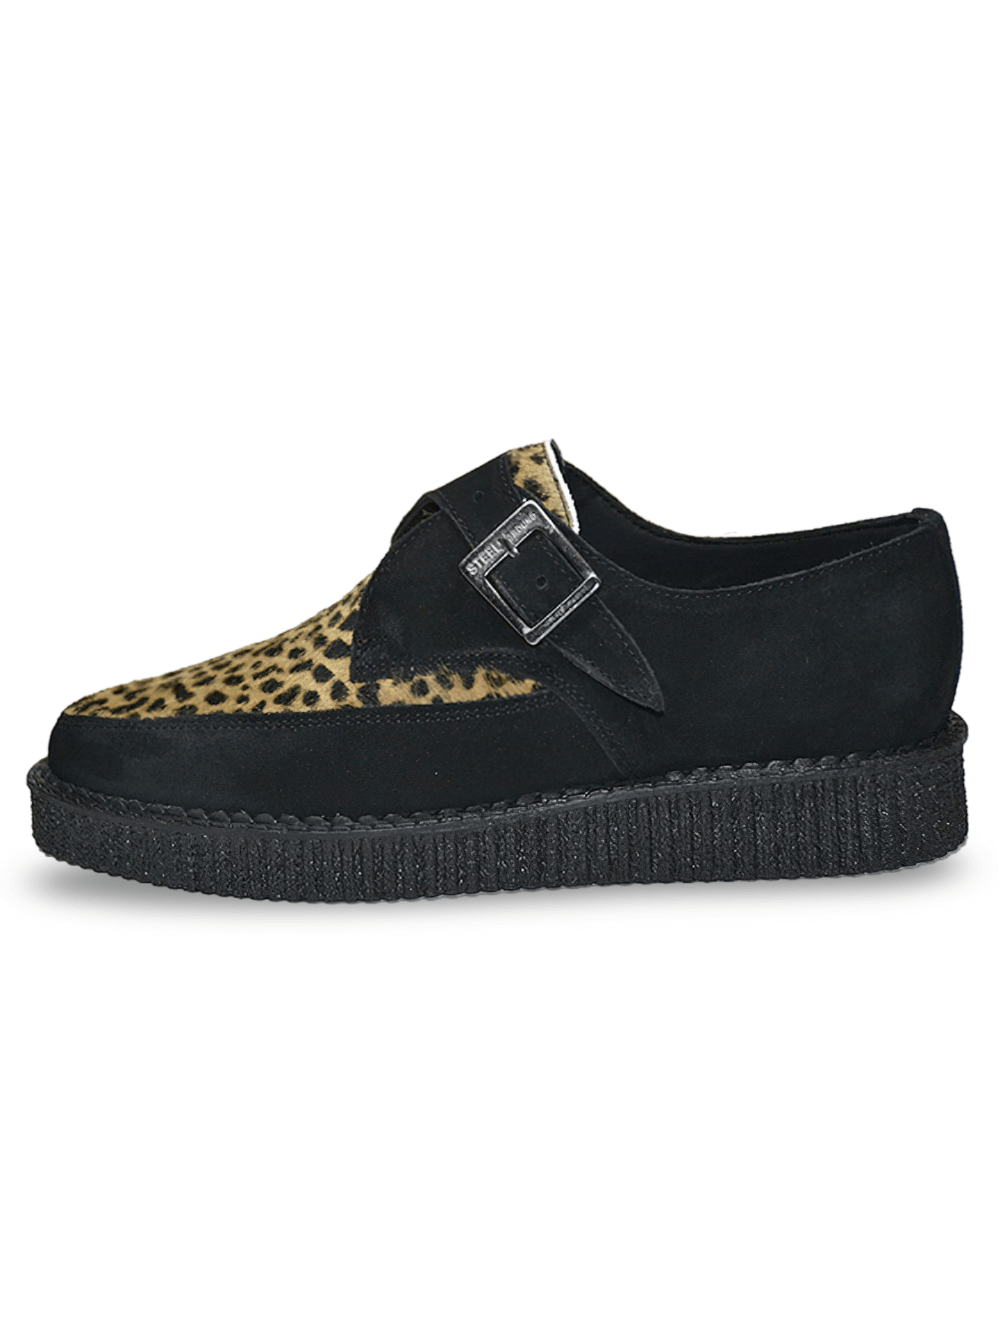 Unisex Lace-Up Black And Leopard Creeper Shoes